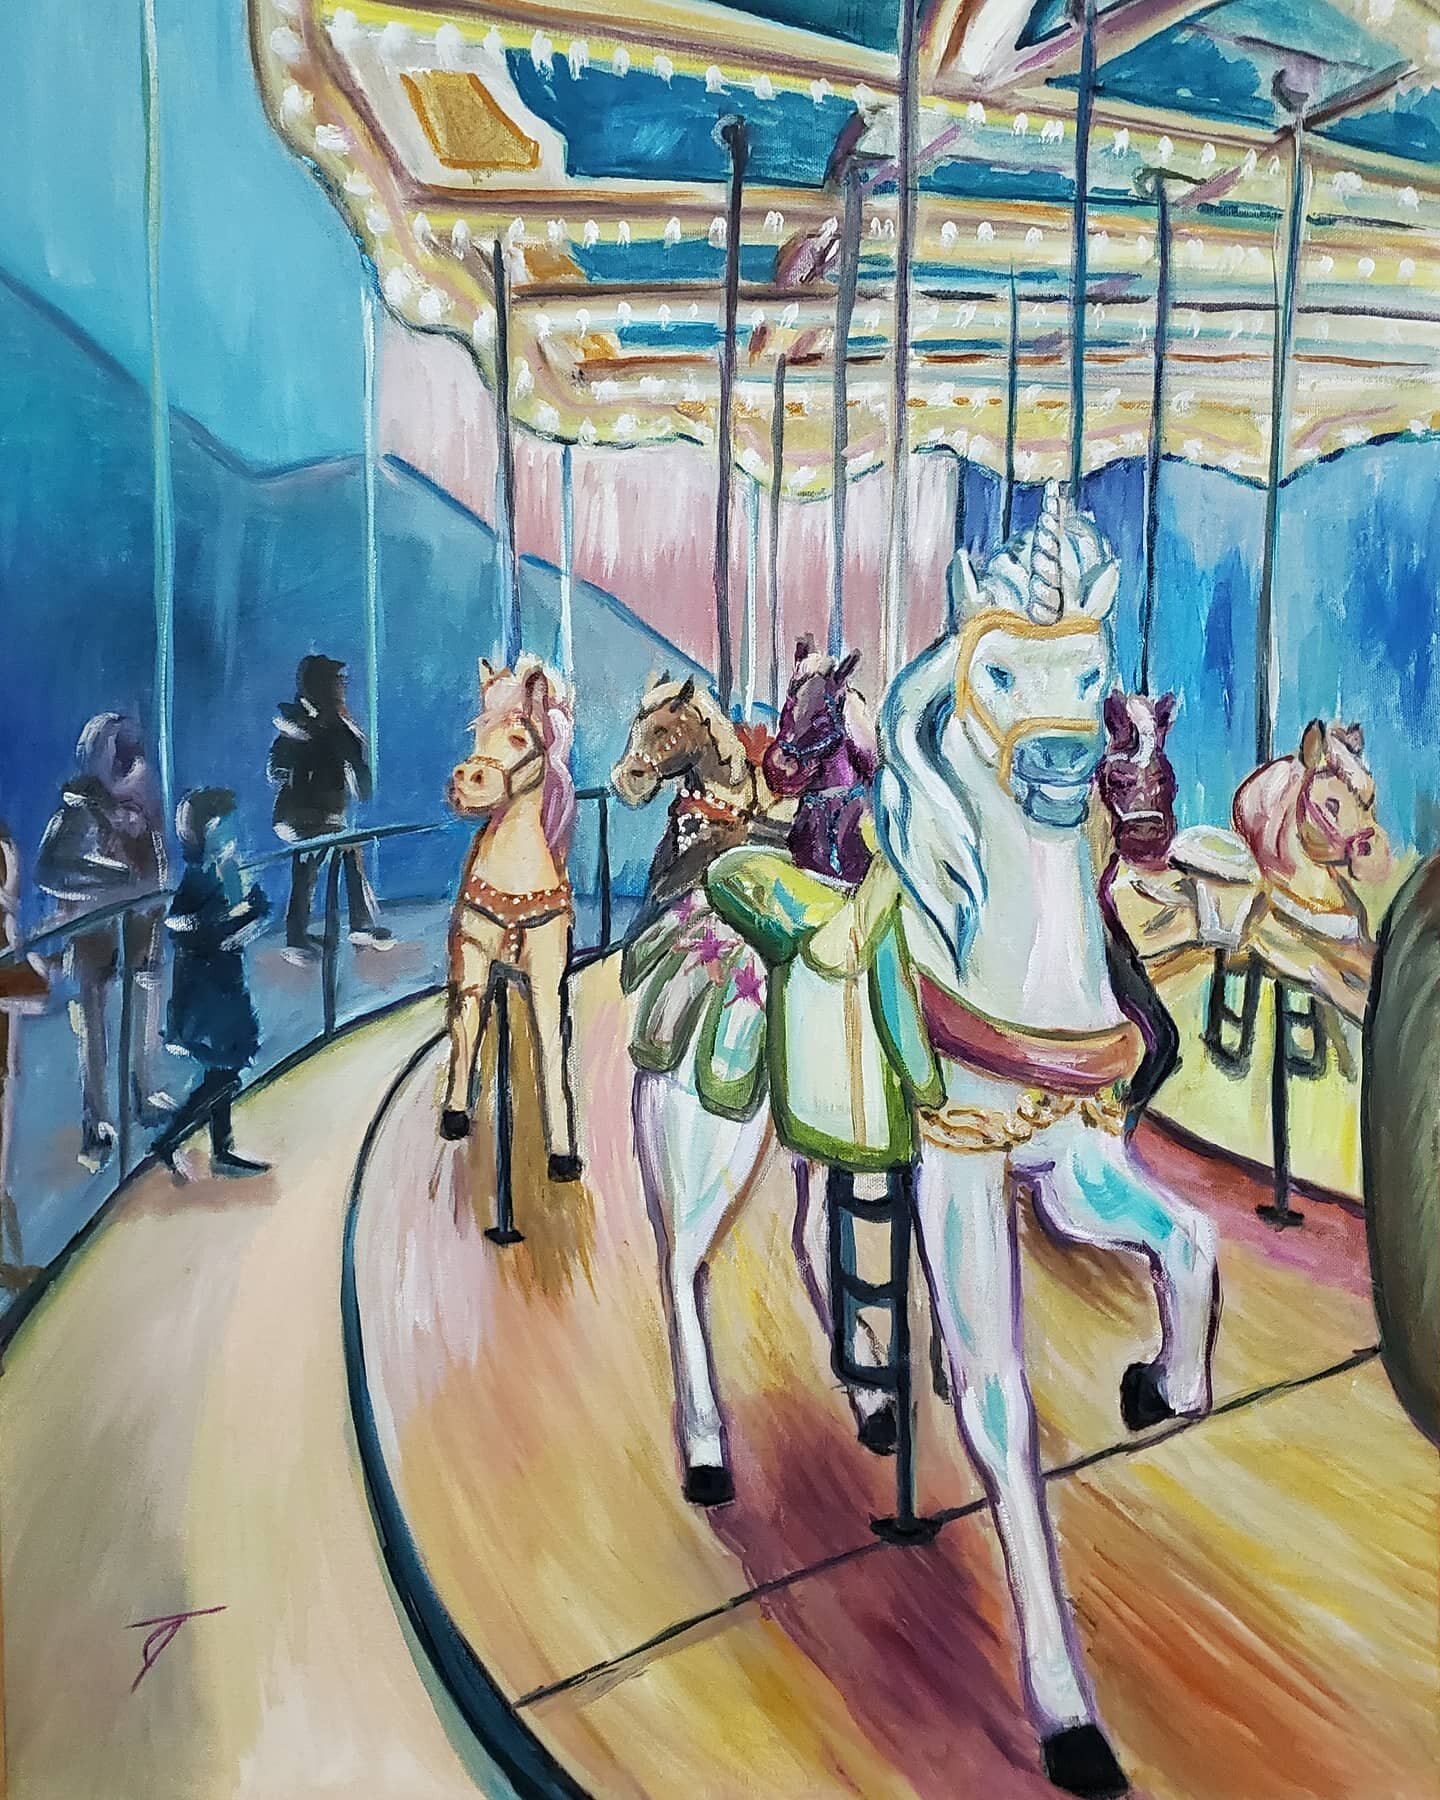 And we have another painting completed! 

This beauty has been named &quot;Unicorn Carousel&quot; and it'll be off to its new home next week ♡. Thankful for the opportunity to keep making beautiful artwork. 

24x36 
Unicorn Carousel 
Oil on Canvas

#